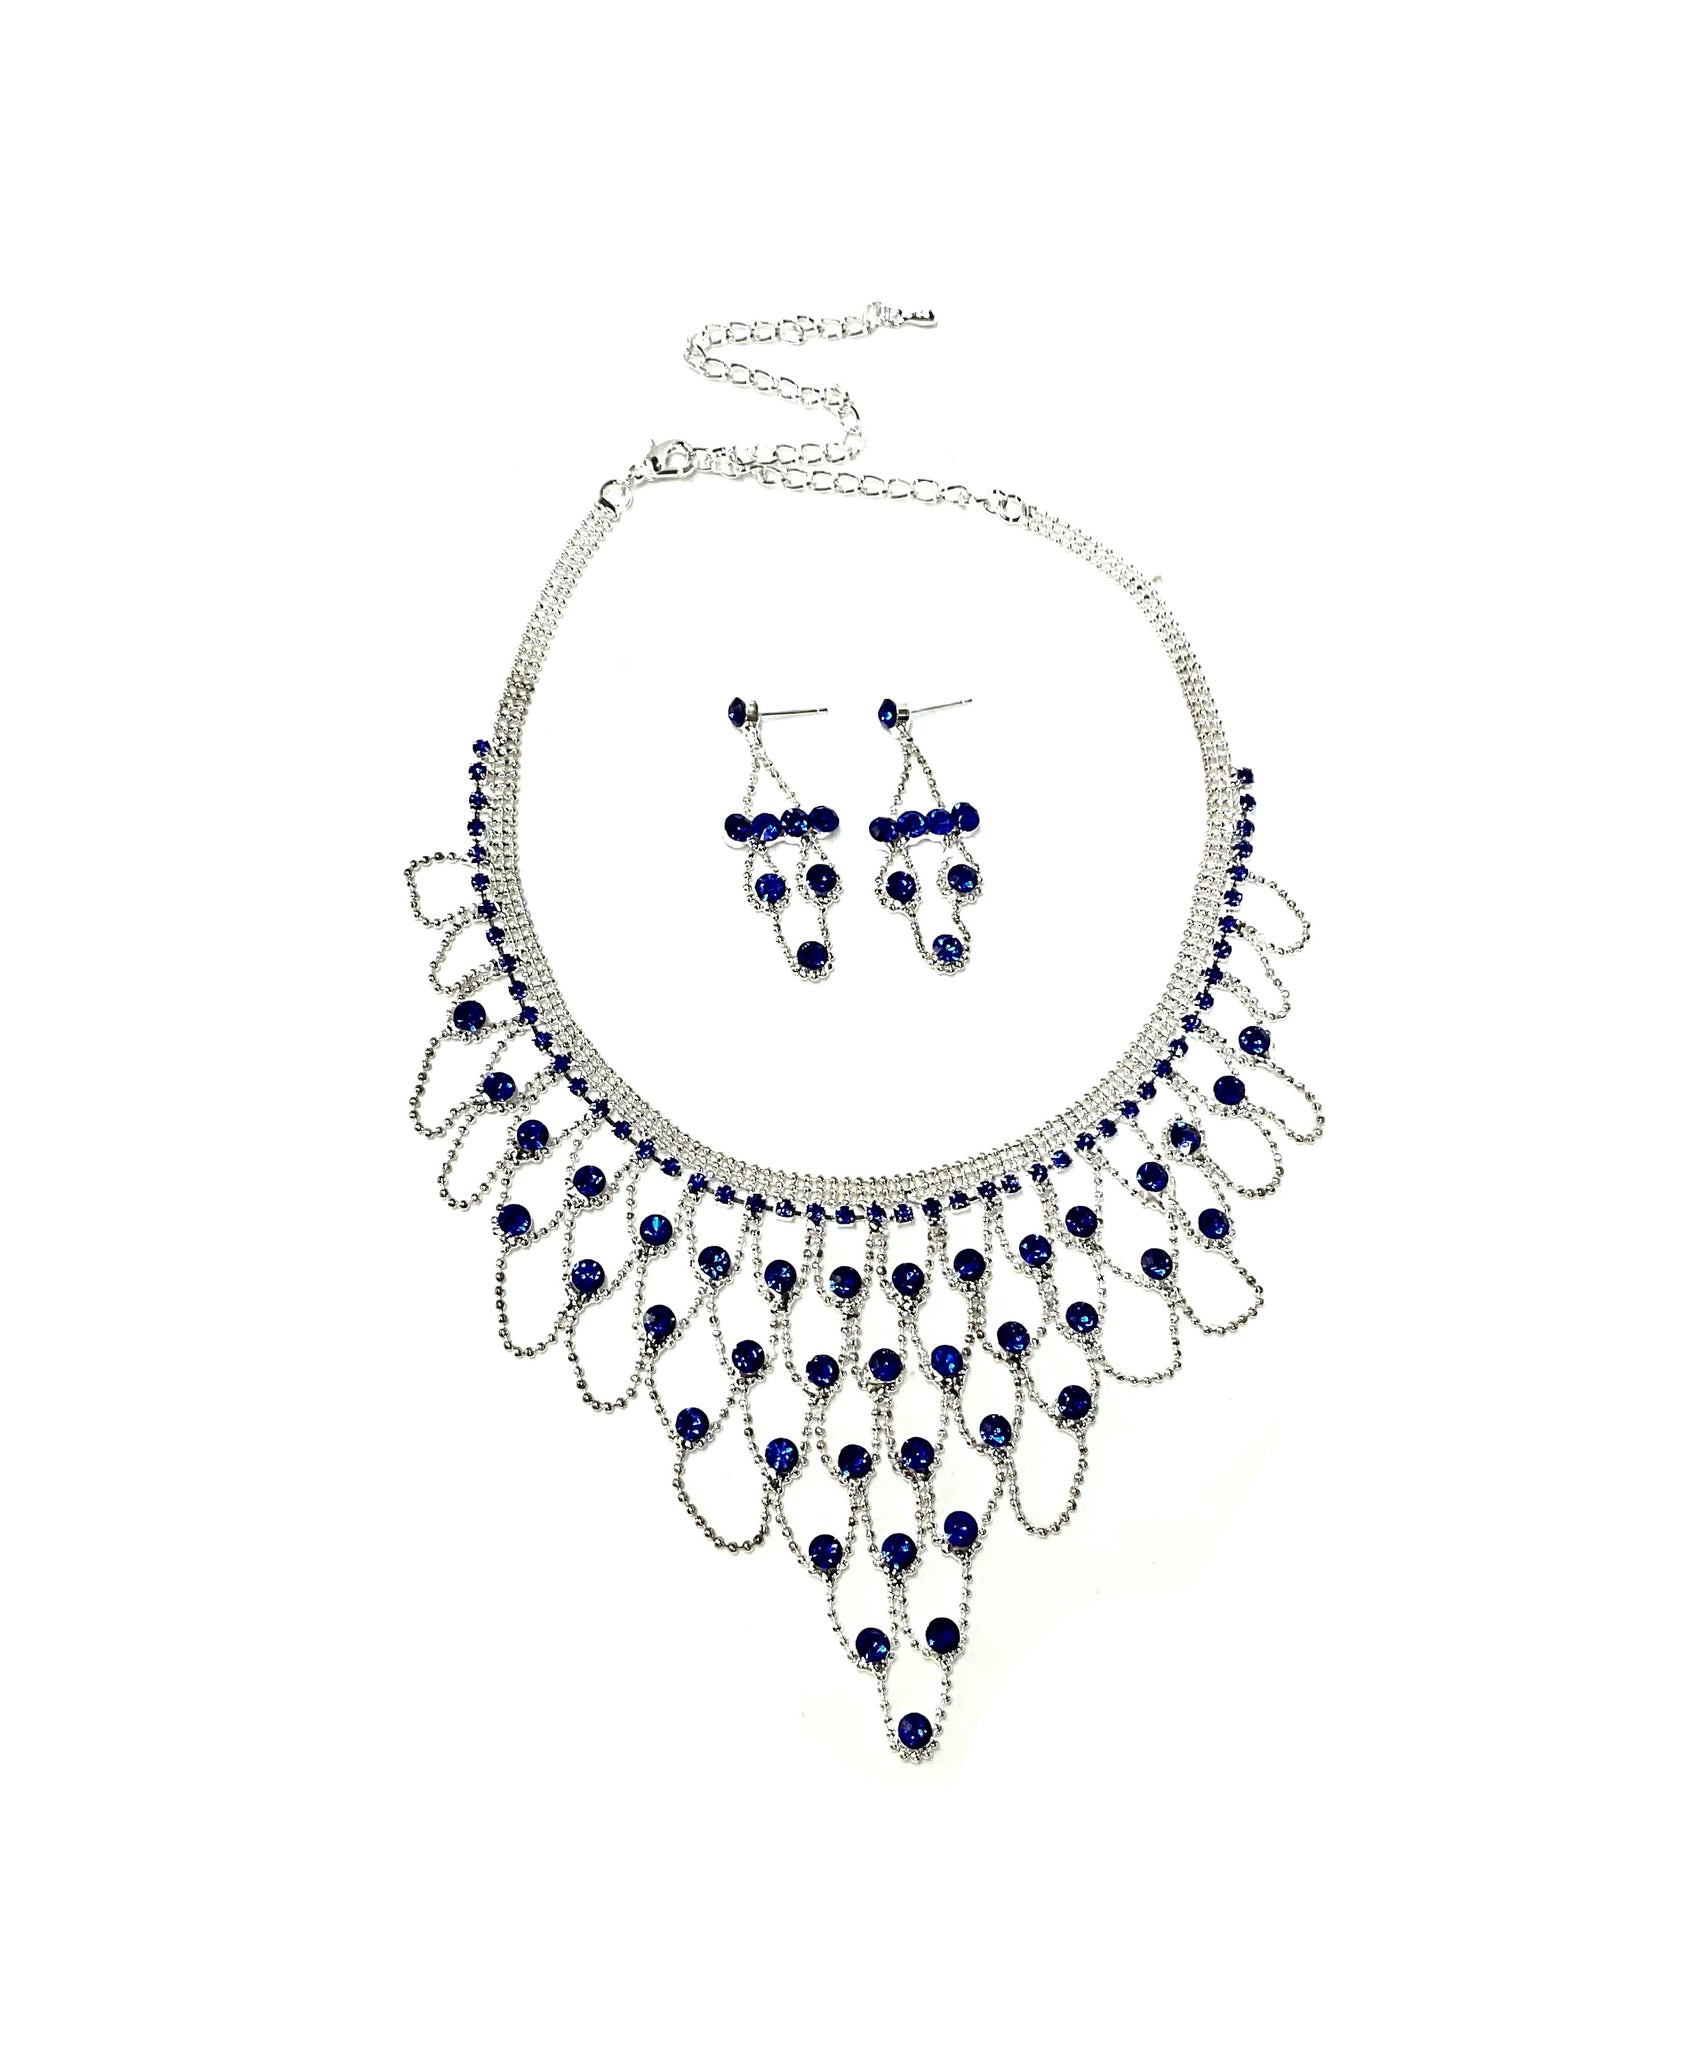 Net style Necklace and Earrings Set #66-14110BL